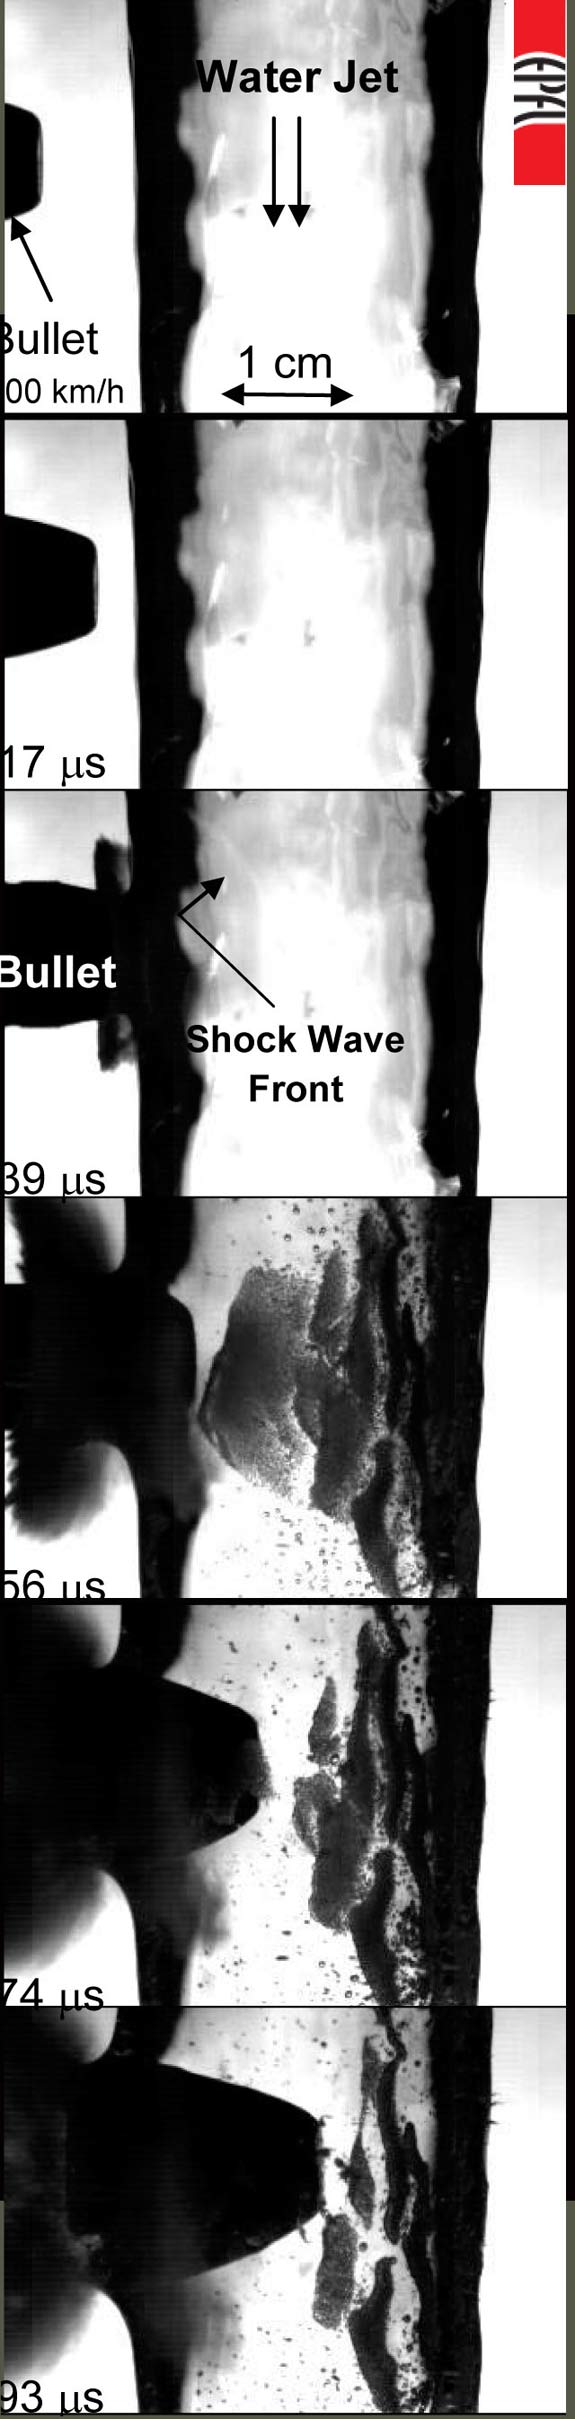 High-speed visualization of 500 km/h bullet on a water jet